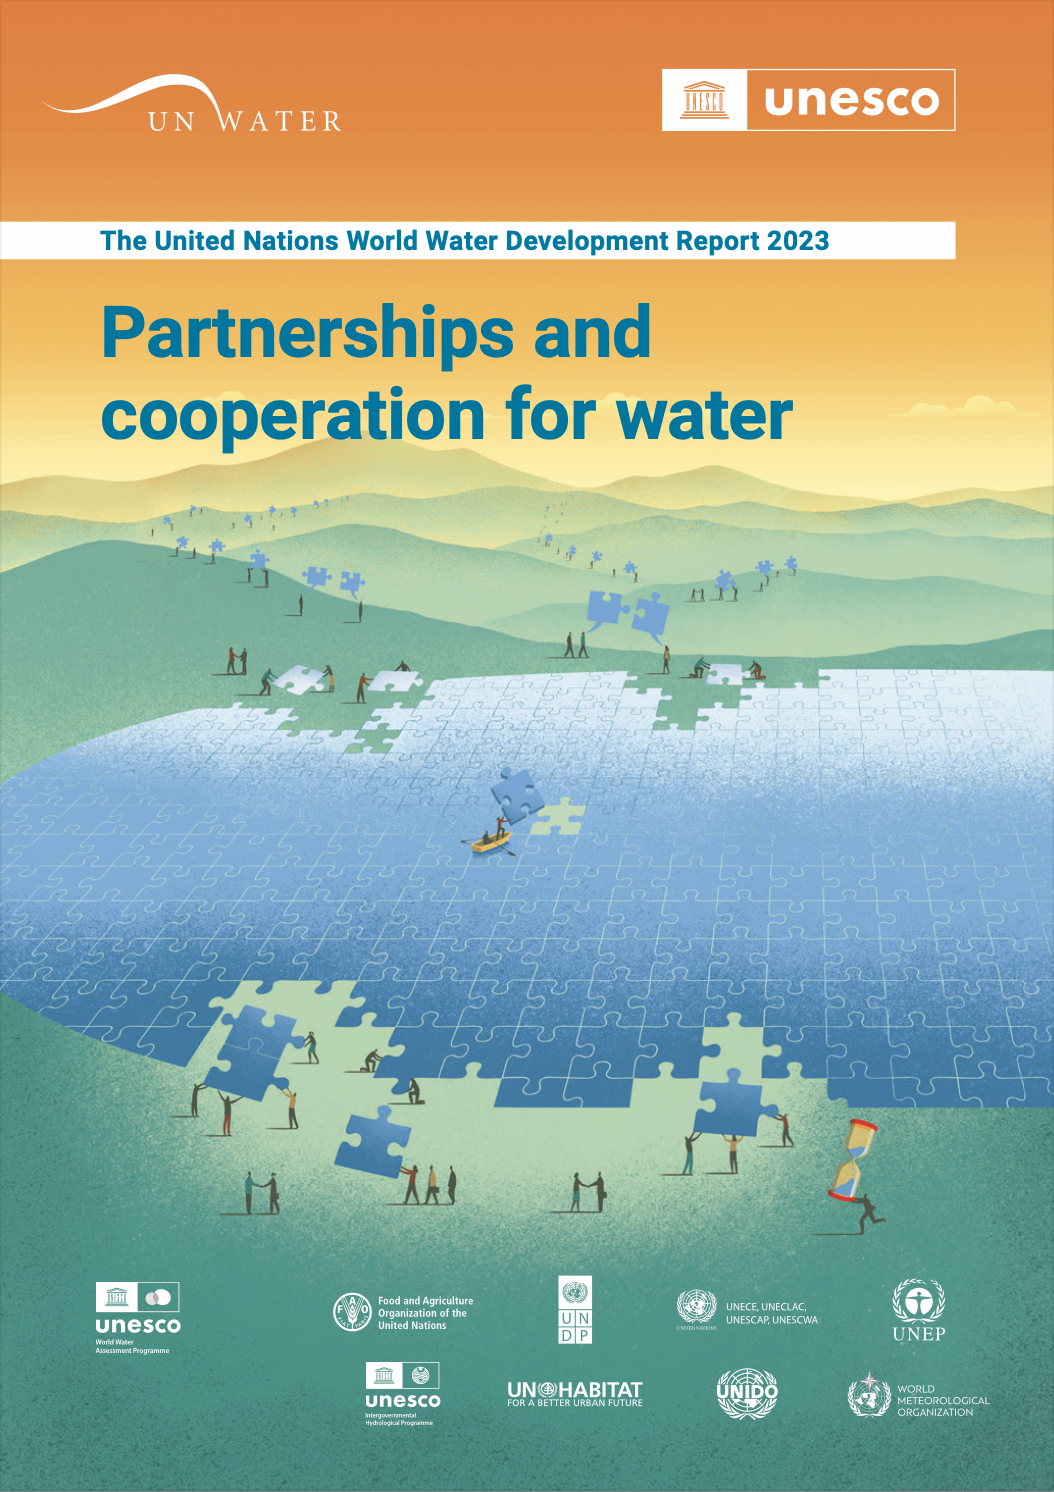 UN-Water  Coordinating the UN's work on water and sanitation